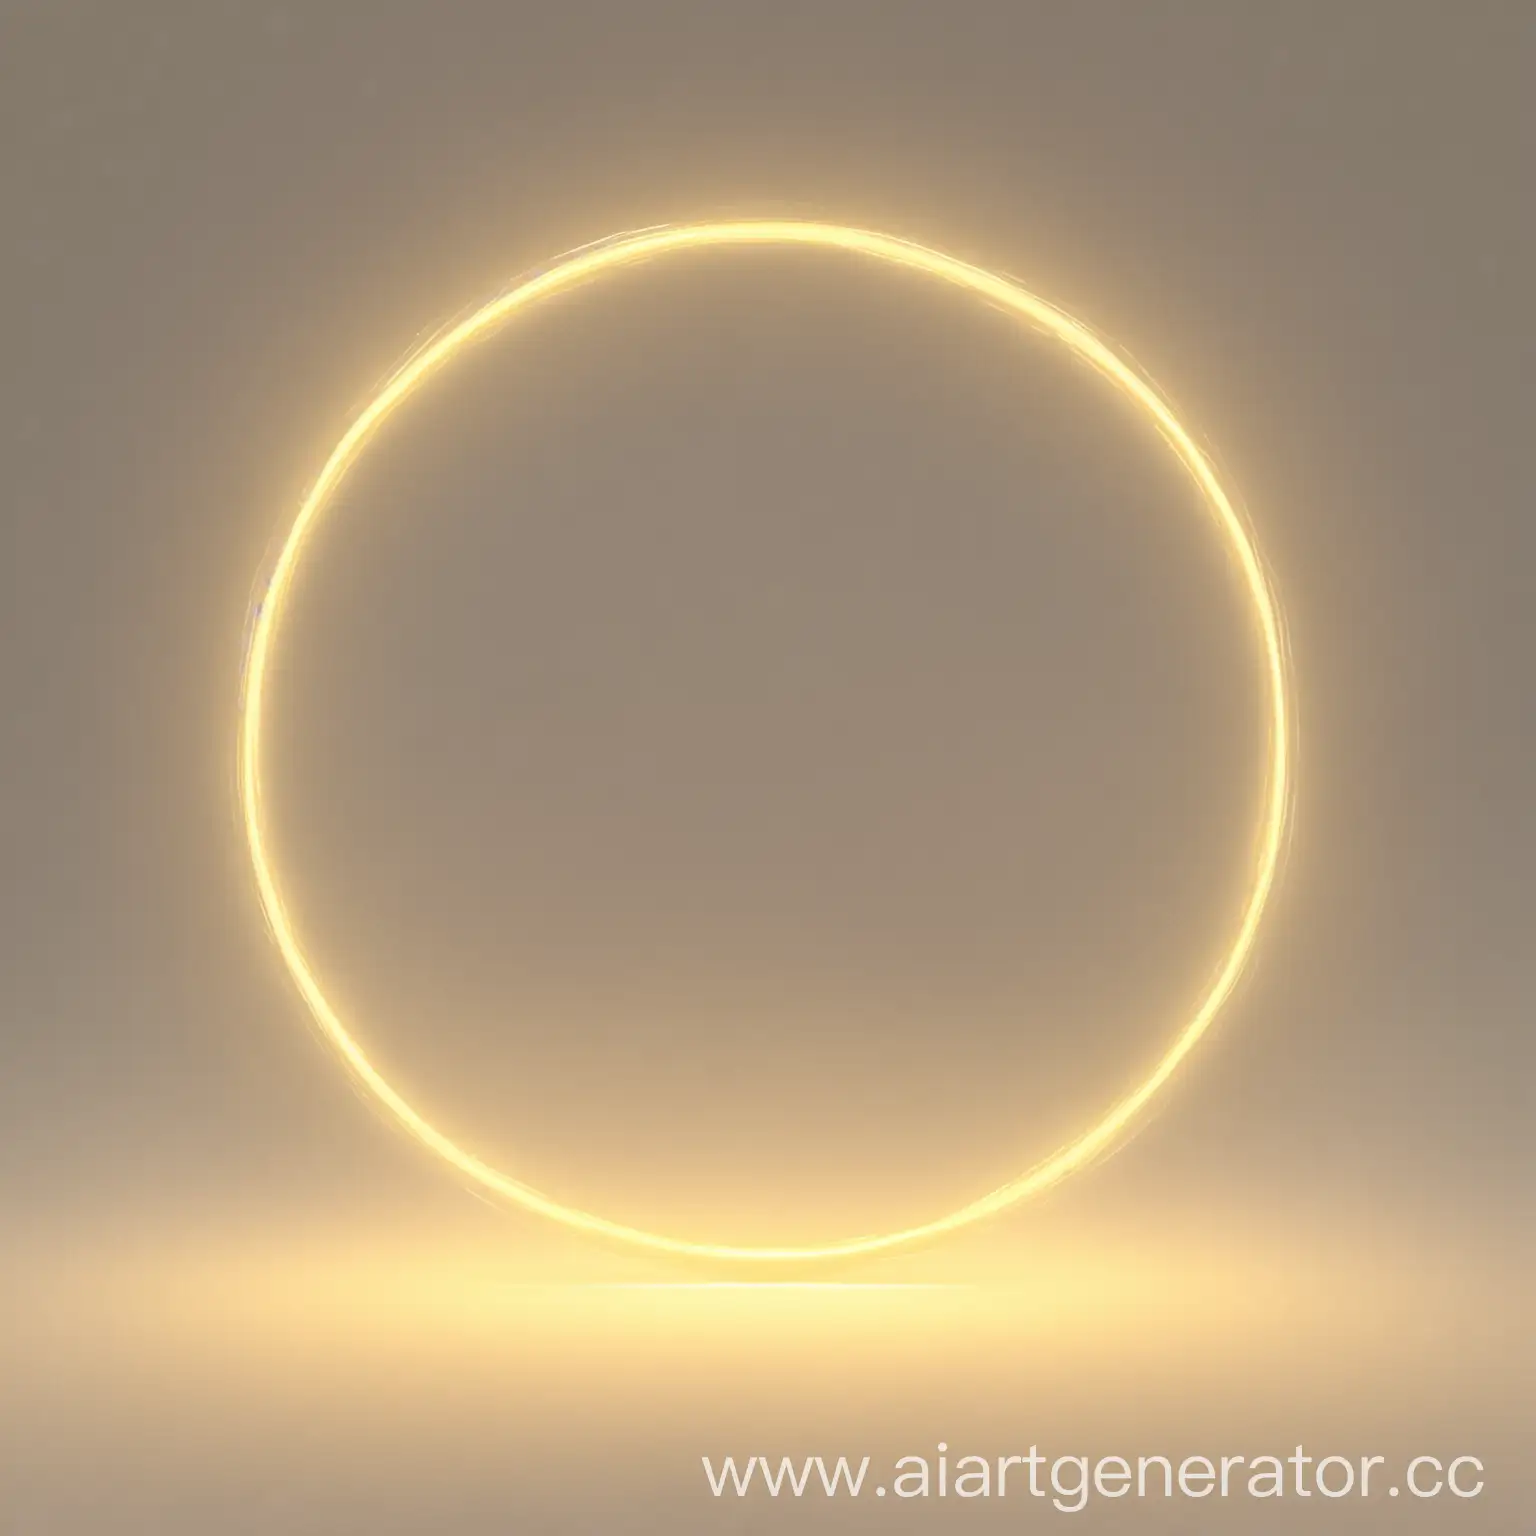 Smooth-Yellow-Circle-on-Light-Background